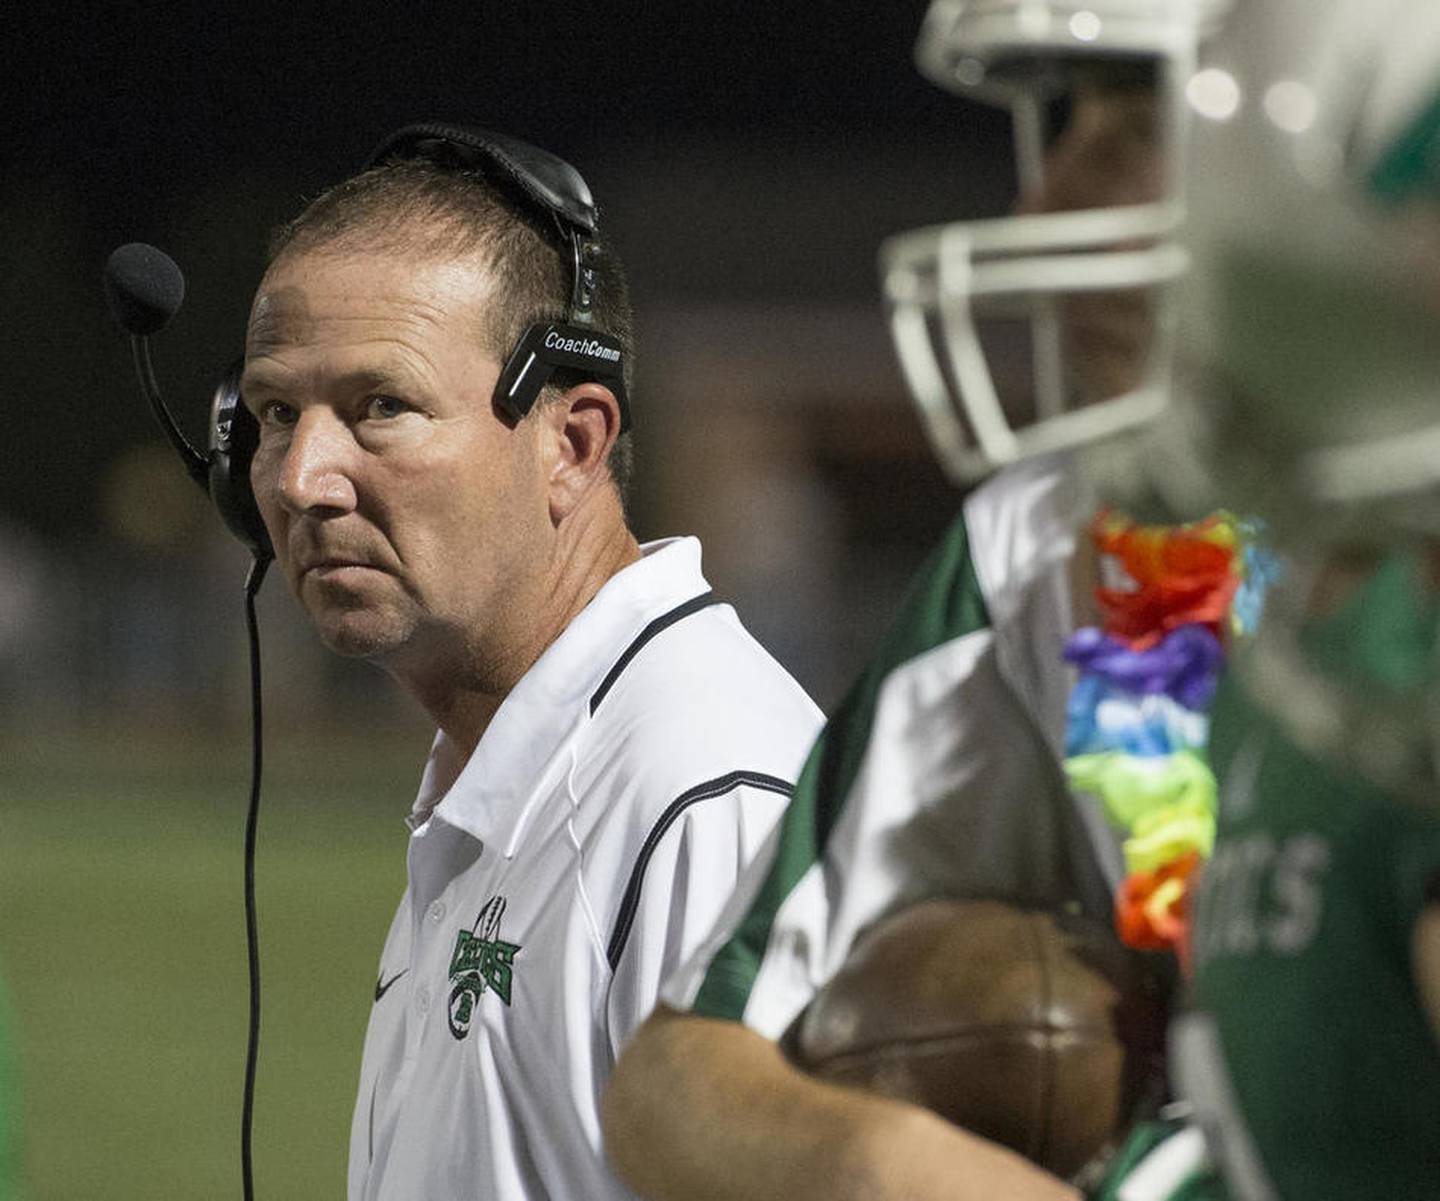 Providence Head Coach Mark Coglianese looks at his defensive line during the game against Brother Rice on Friday, Sept. 23, 2016 hosted at Providence Catholic High School in New Lenox. The Celtics fell to the Crusaders, 42-14. (Photo by Paul Bergstrom for Shaw Media)